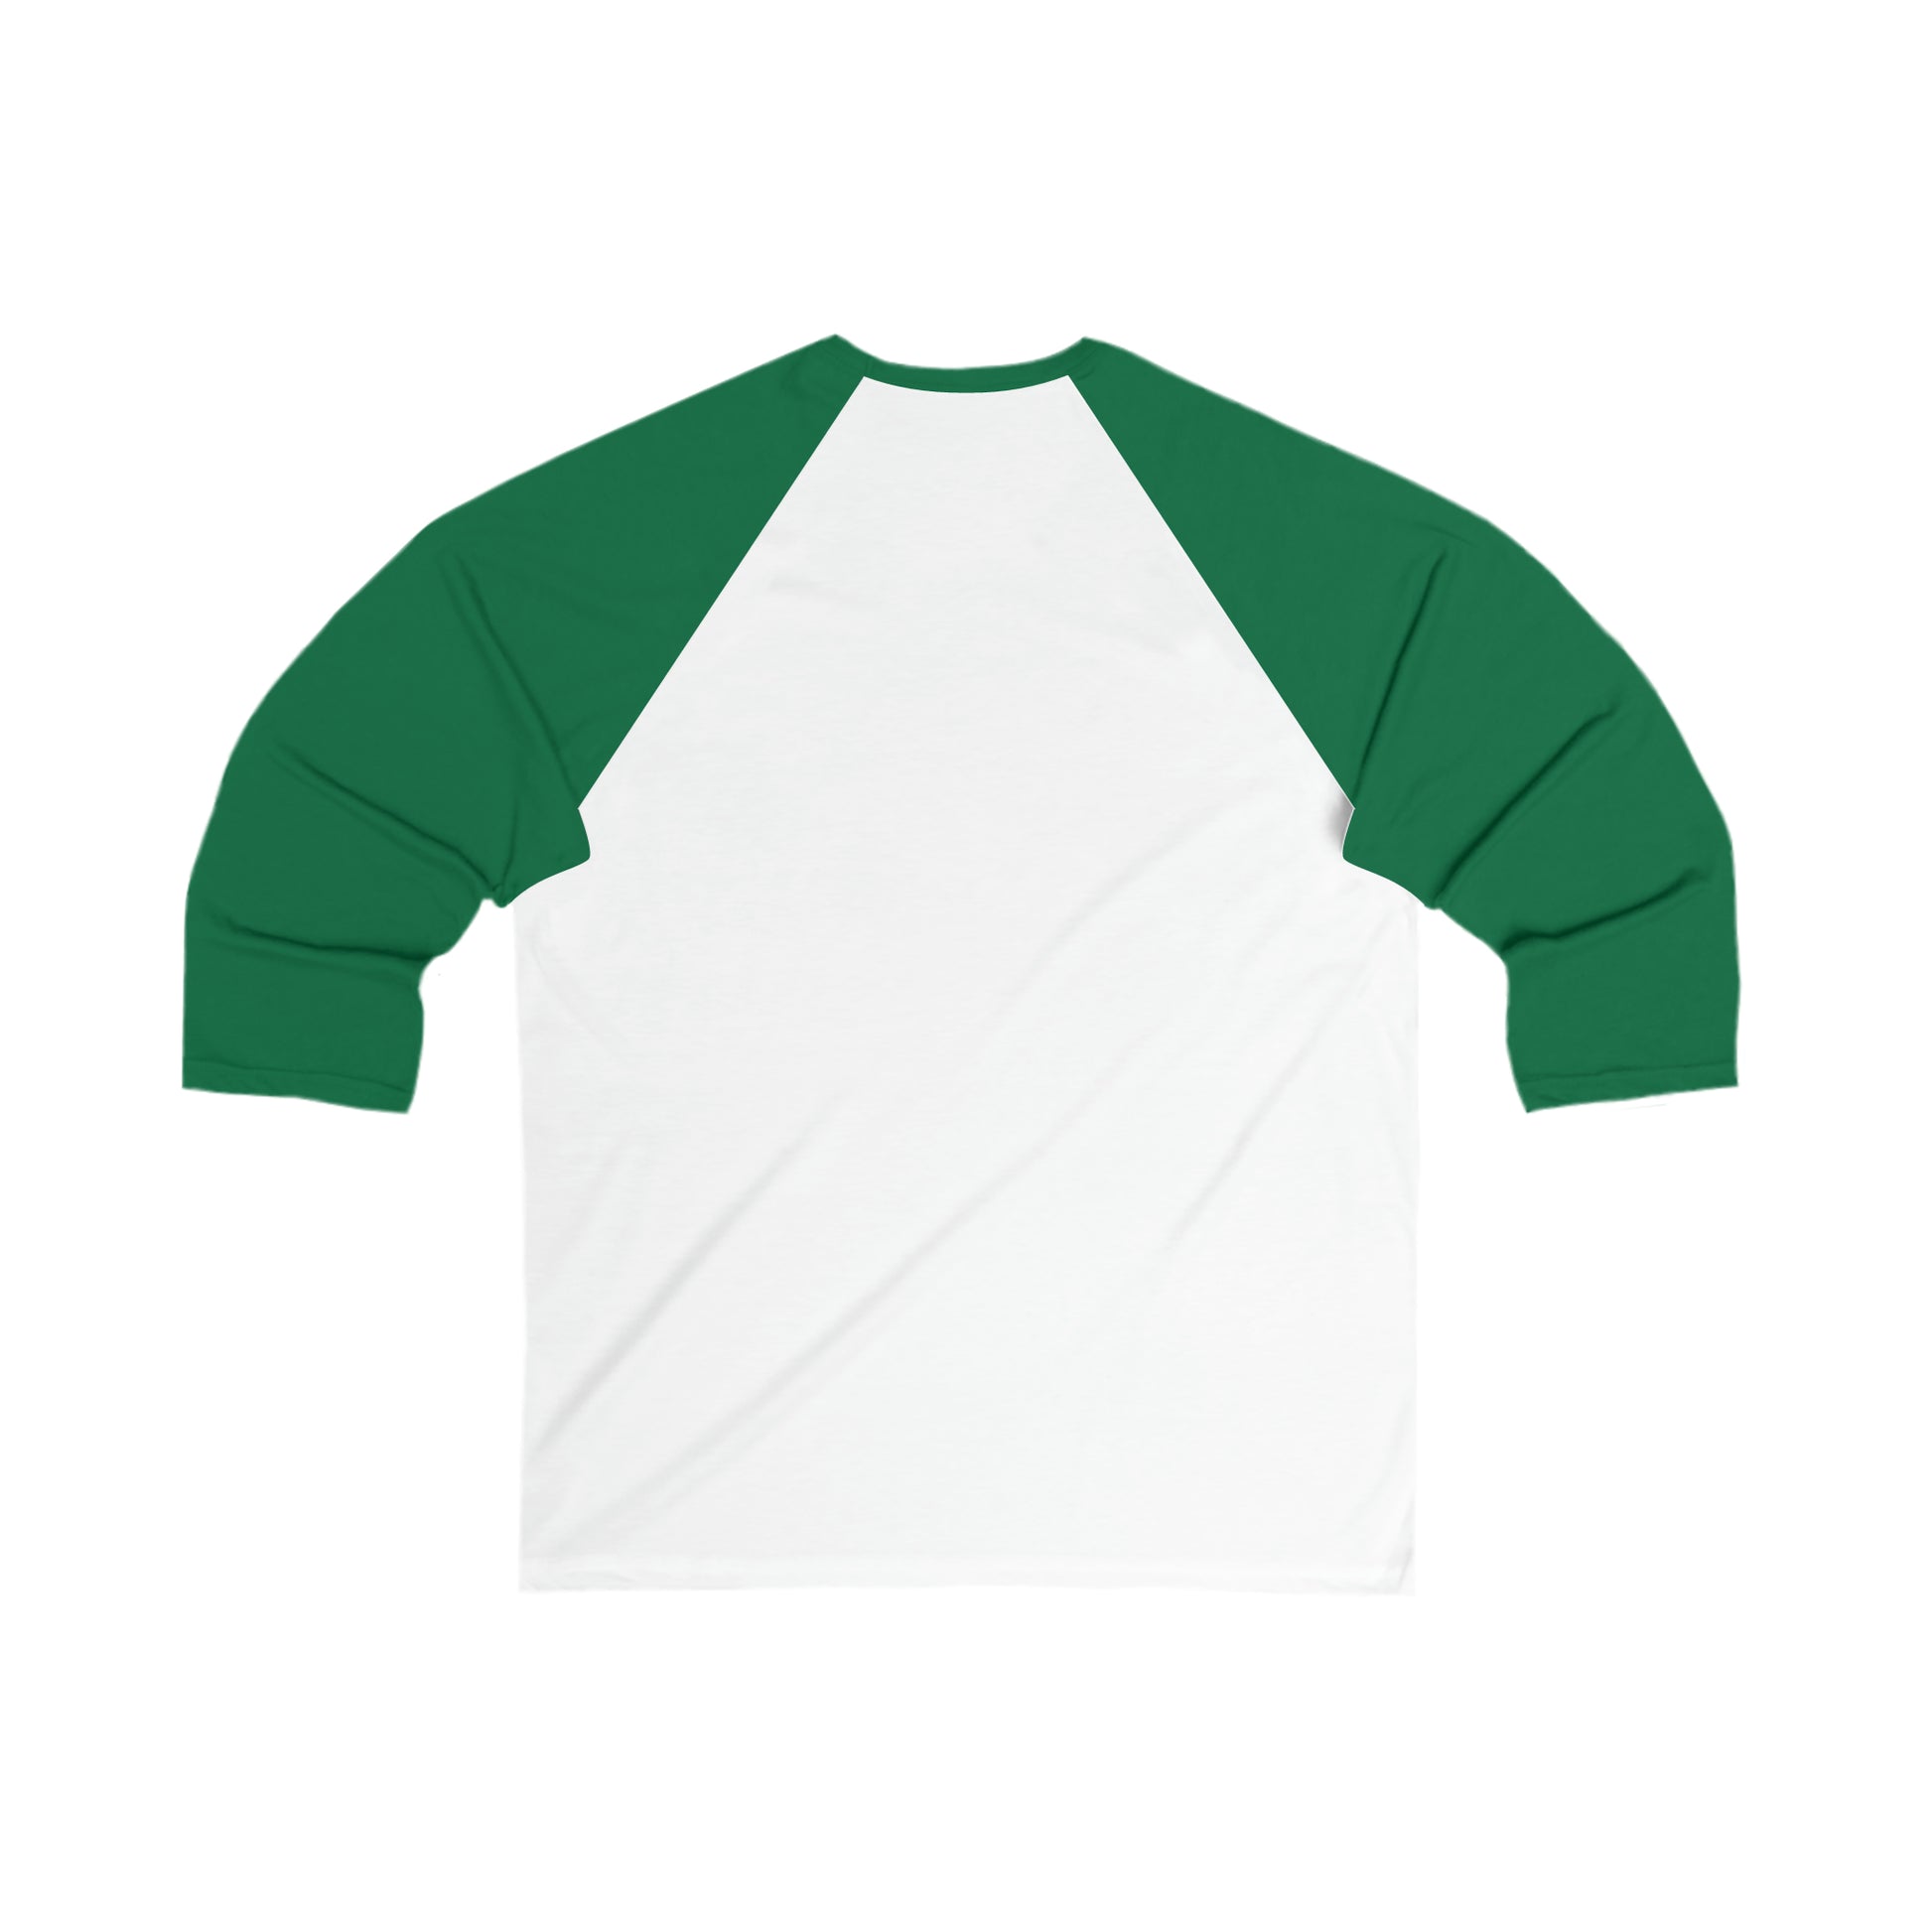 A Printify Unisex 3\4 Sleeve Logo Baseball Tee with green raglan sleeves and a white torso, displayed on a plain white background, featuring a subtle Toronto Cabbagetown emblem.